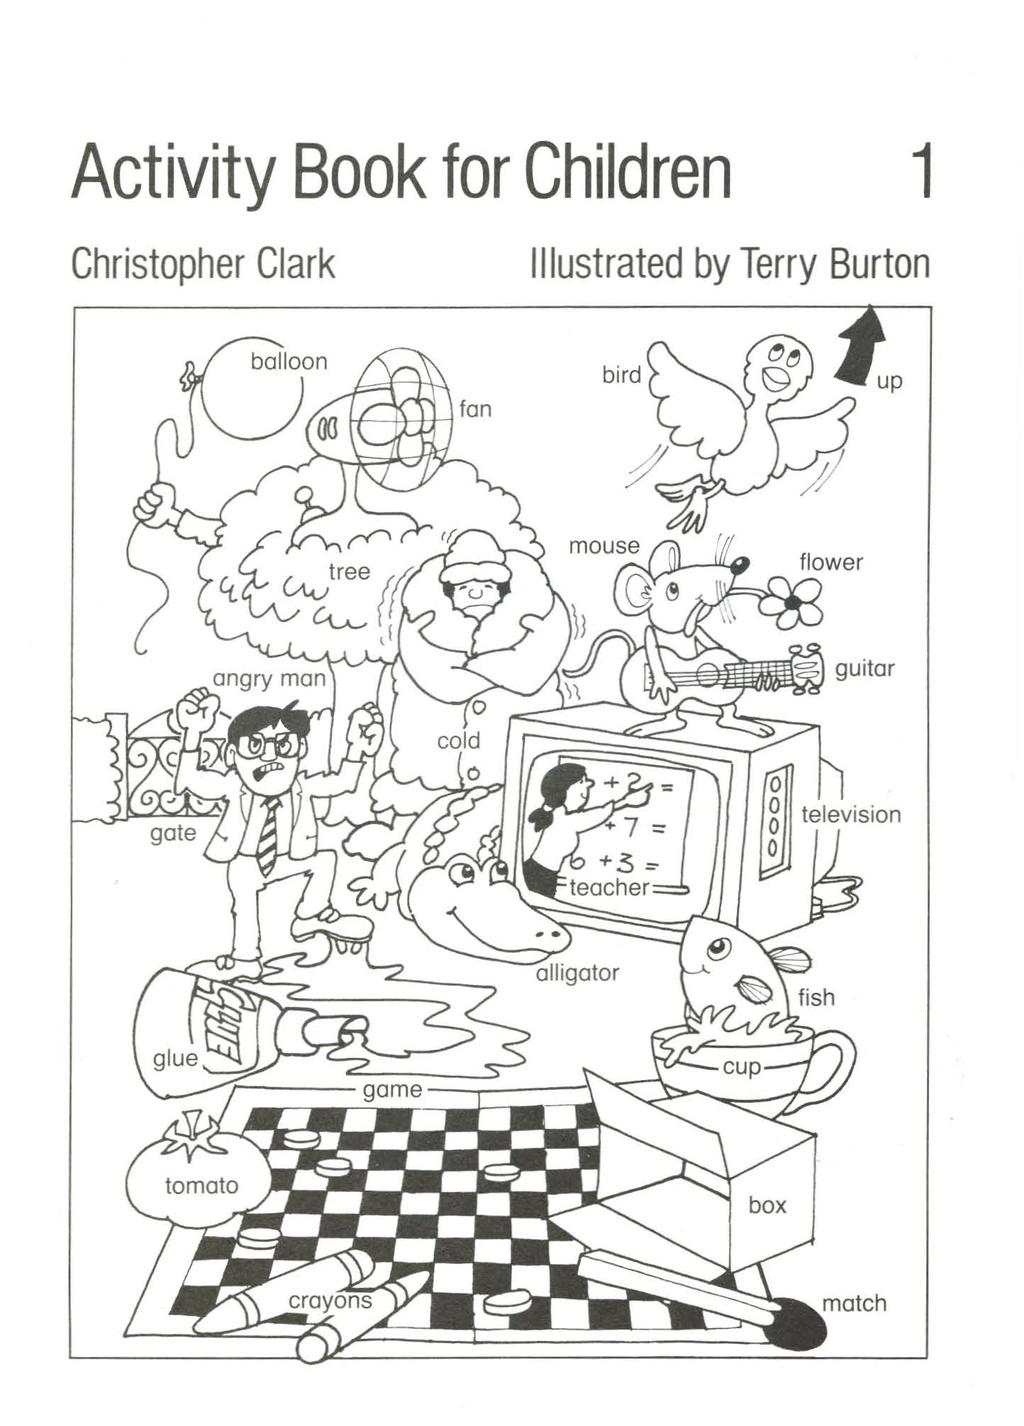 Activity Book for Children 1 Christopher Clark llustrated by Terry Burton balloon ' f: fan bird up mouse